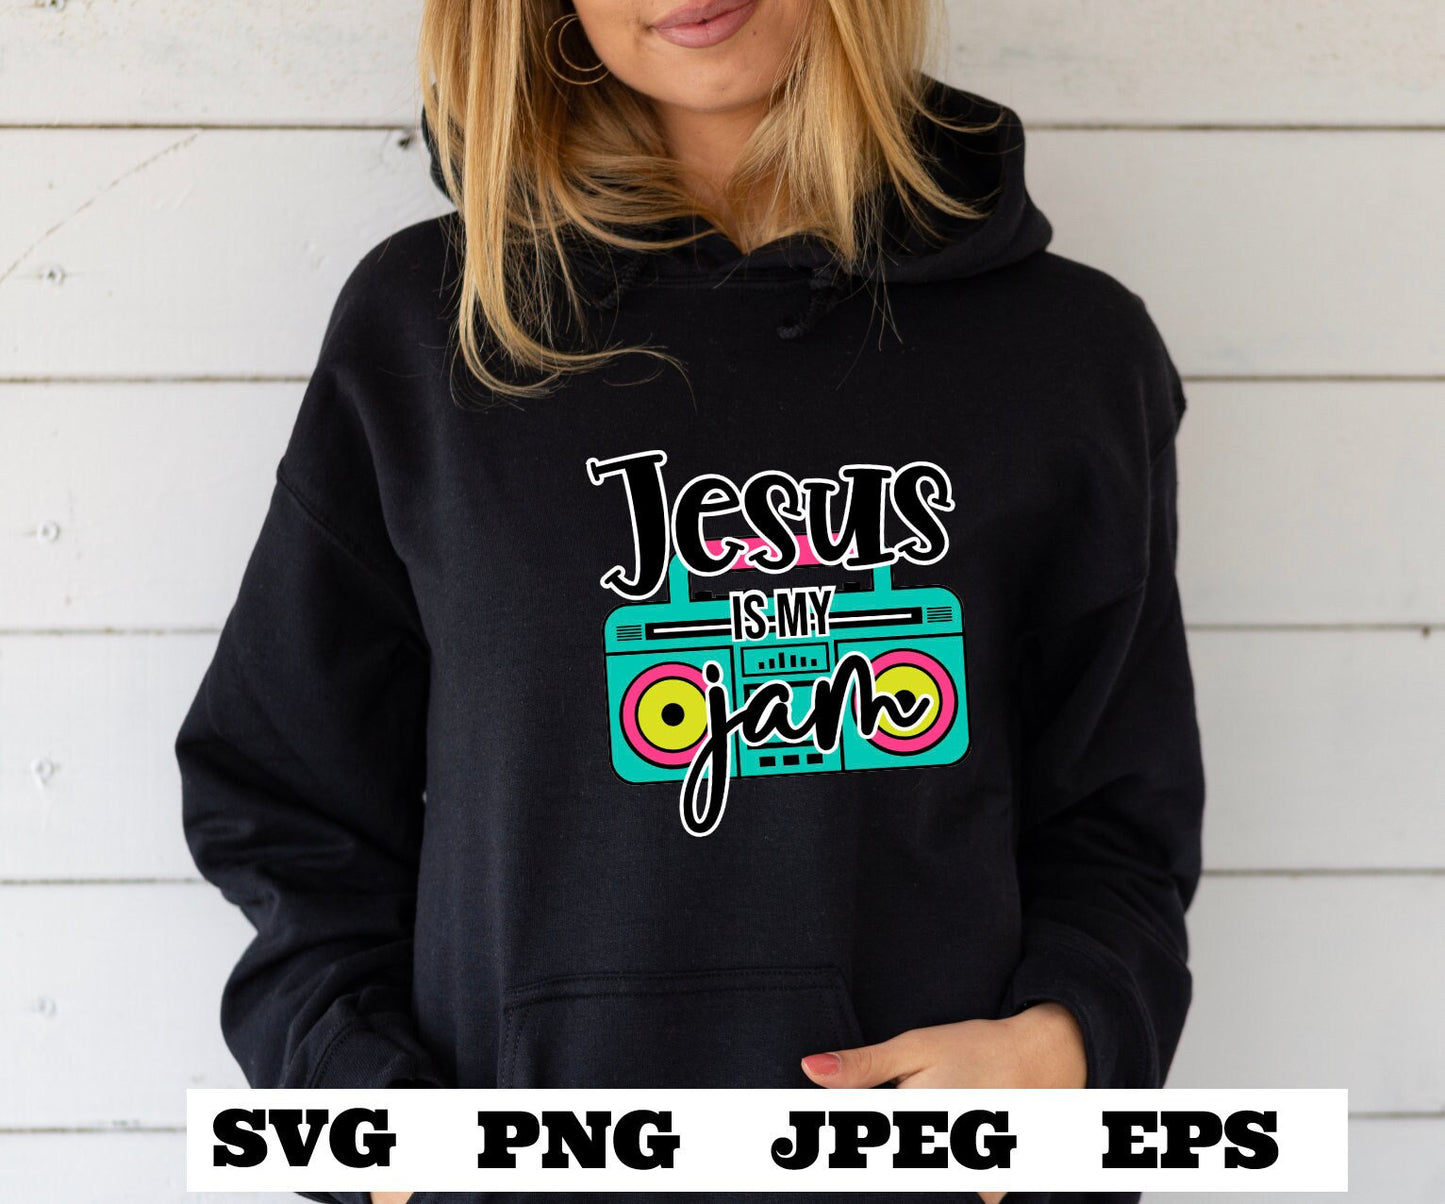 Jesus is my jam PNG EPS SVG jpeg Download Christian svg Jesus png T shirts vinyl Church Outreach ministry download - cut file christian